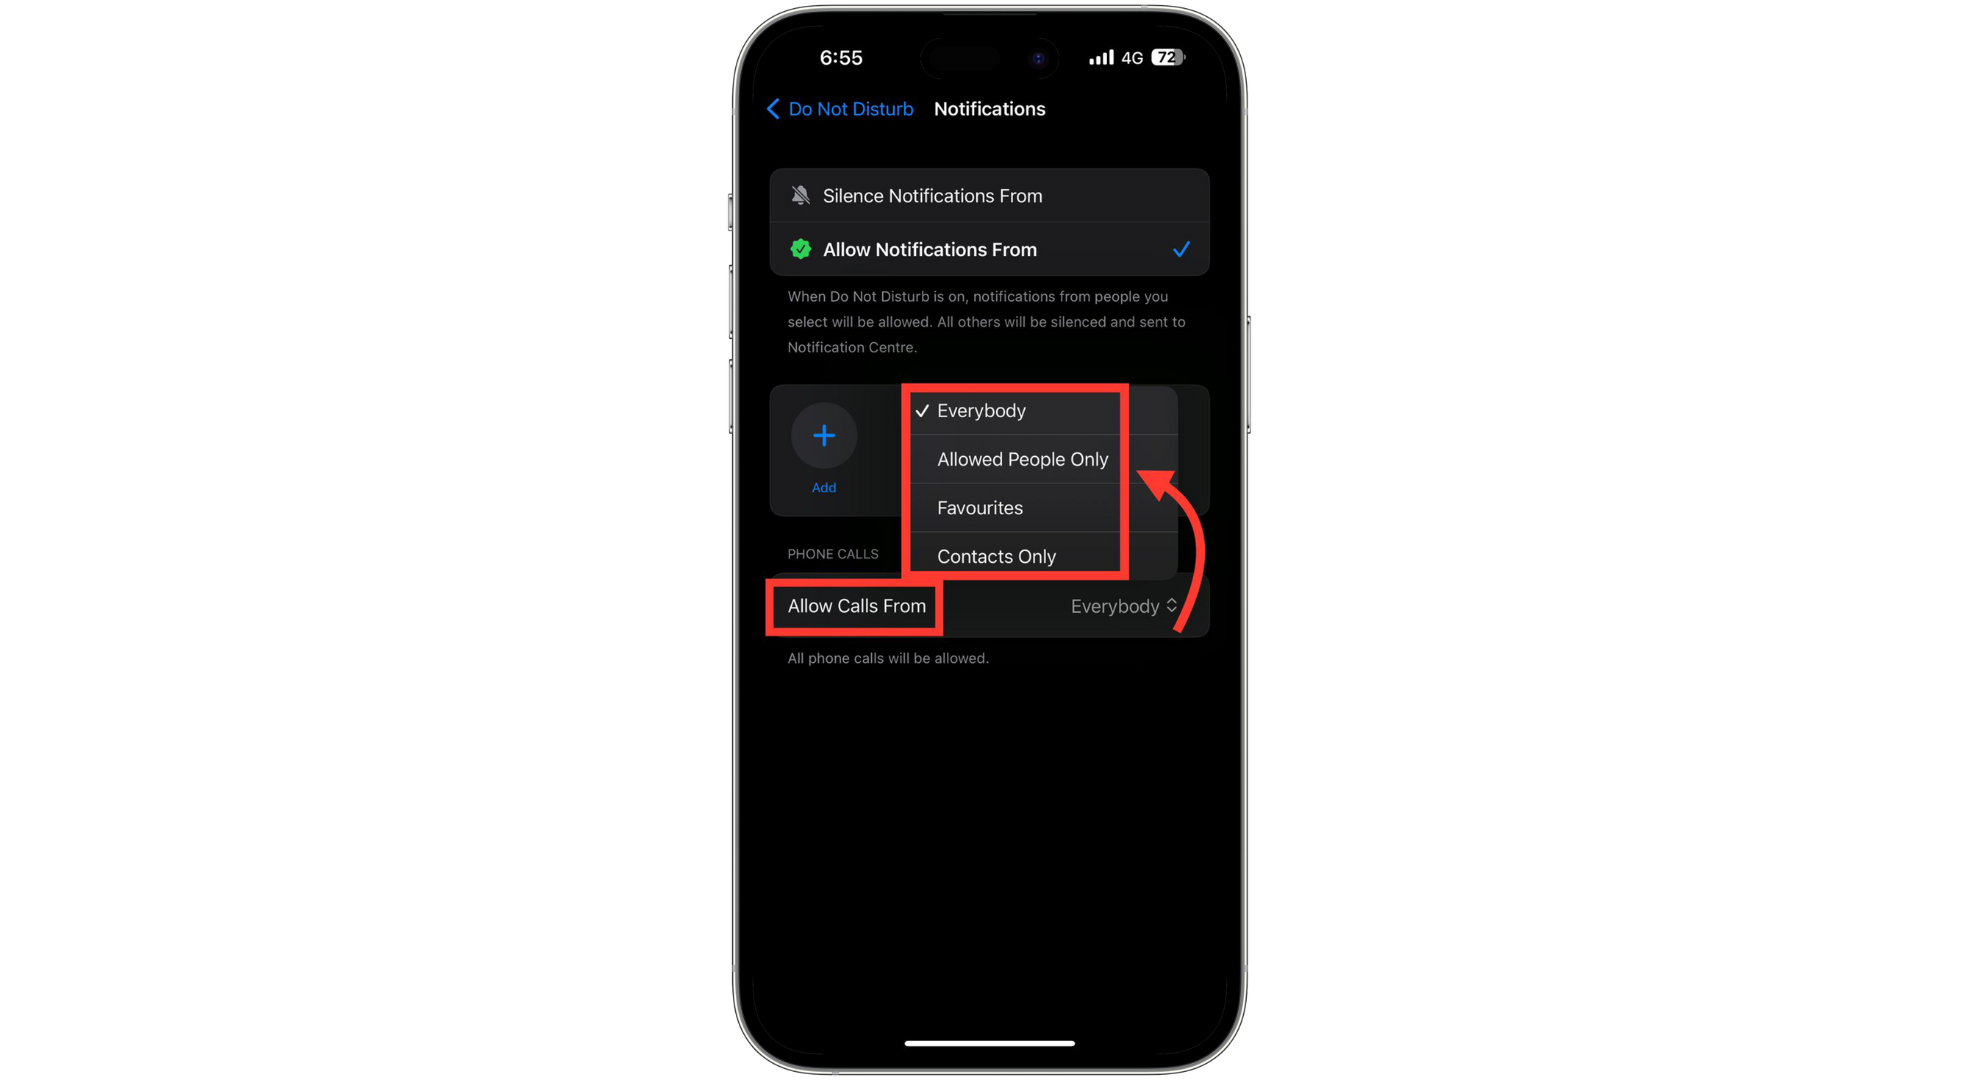 Tap Allow Calls From_ and select an option